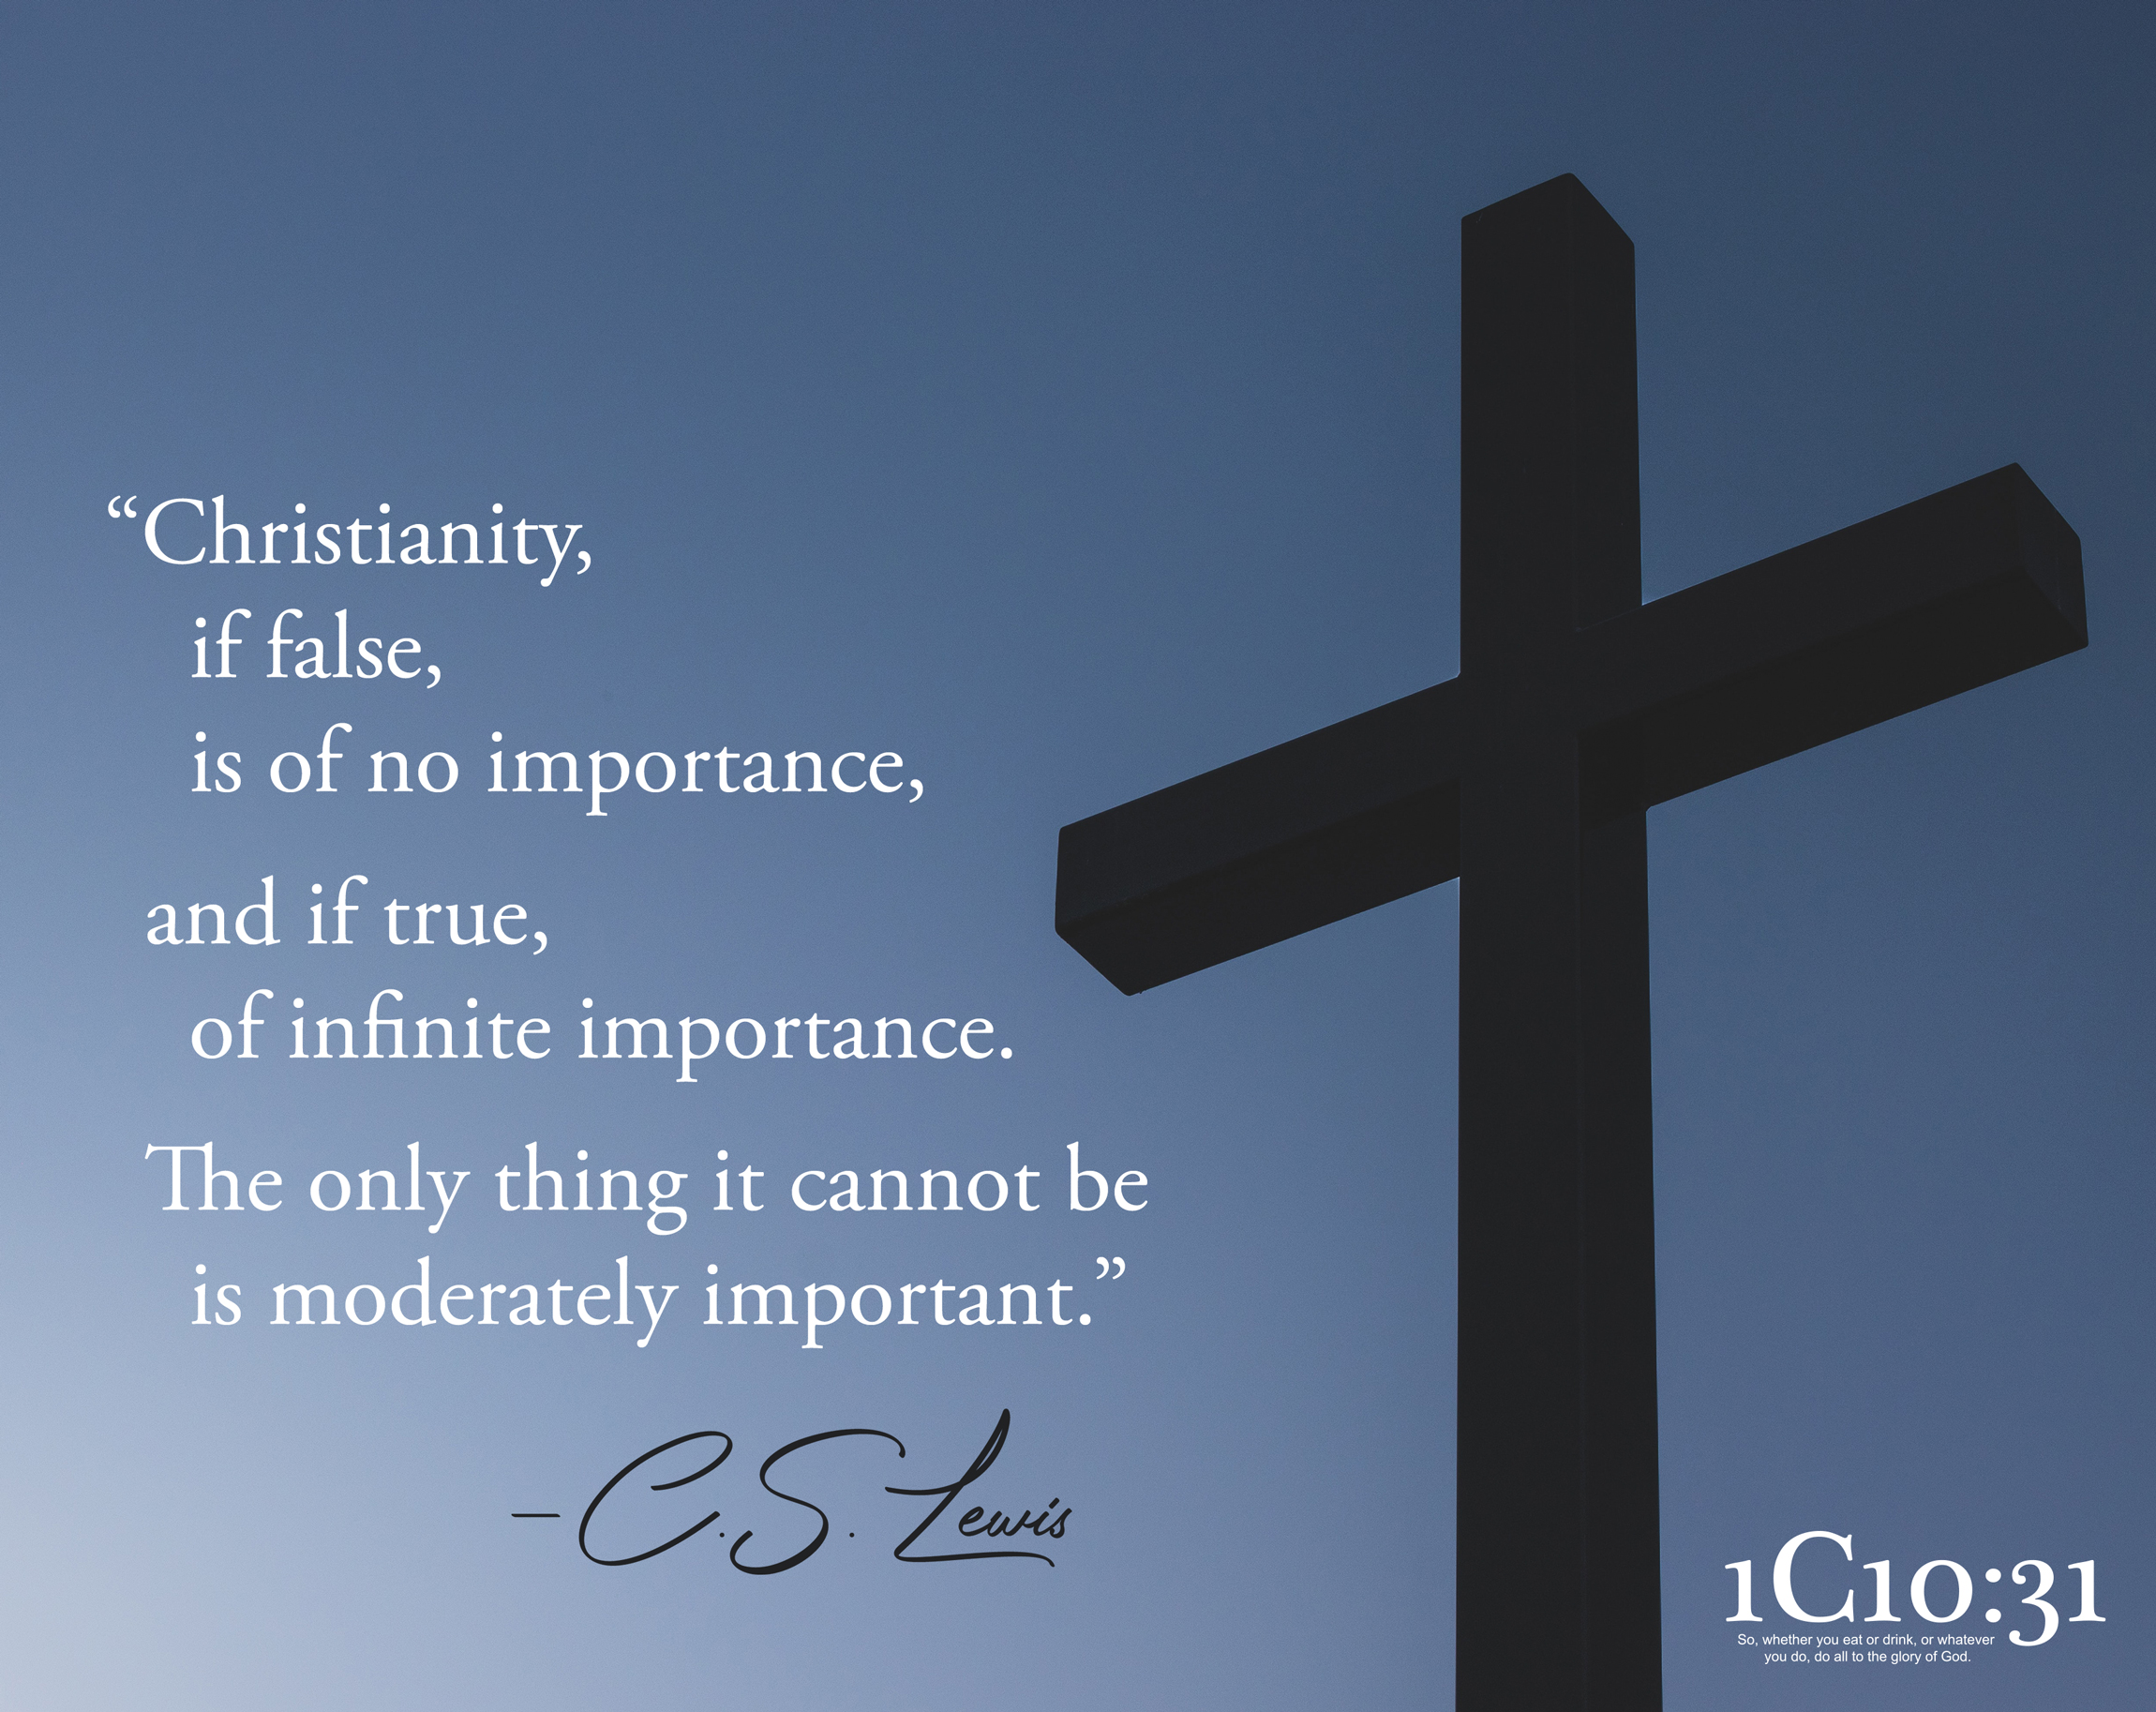 Christianity, if false, is of no importance, and if true, of infinite importance. The only thing it cannot be is moderately important.